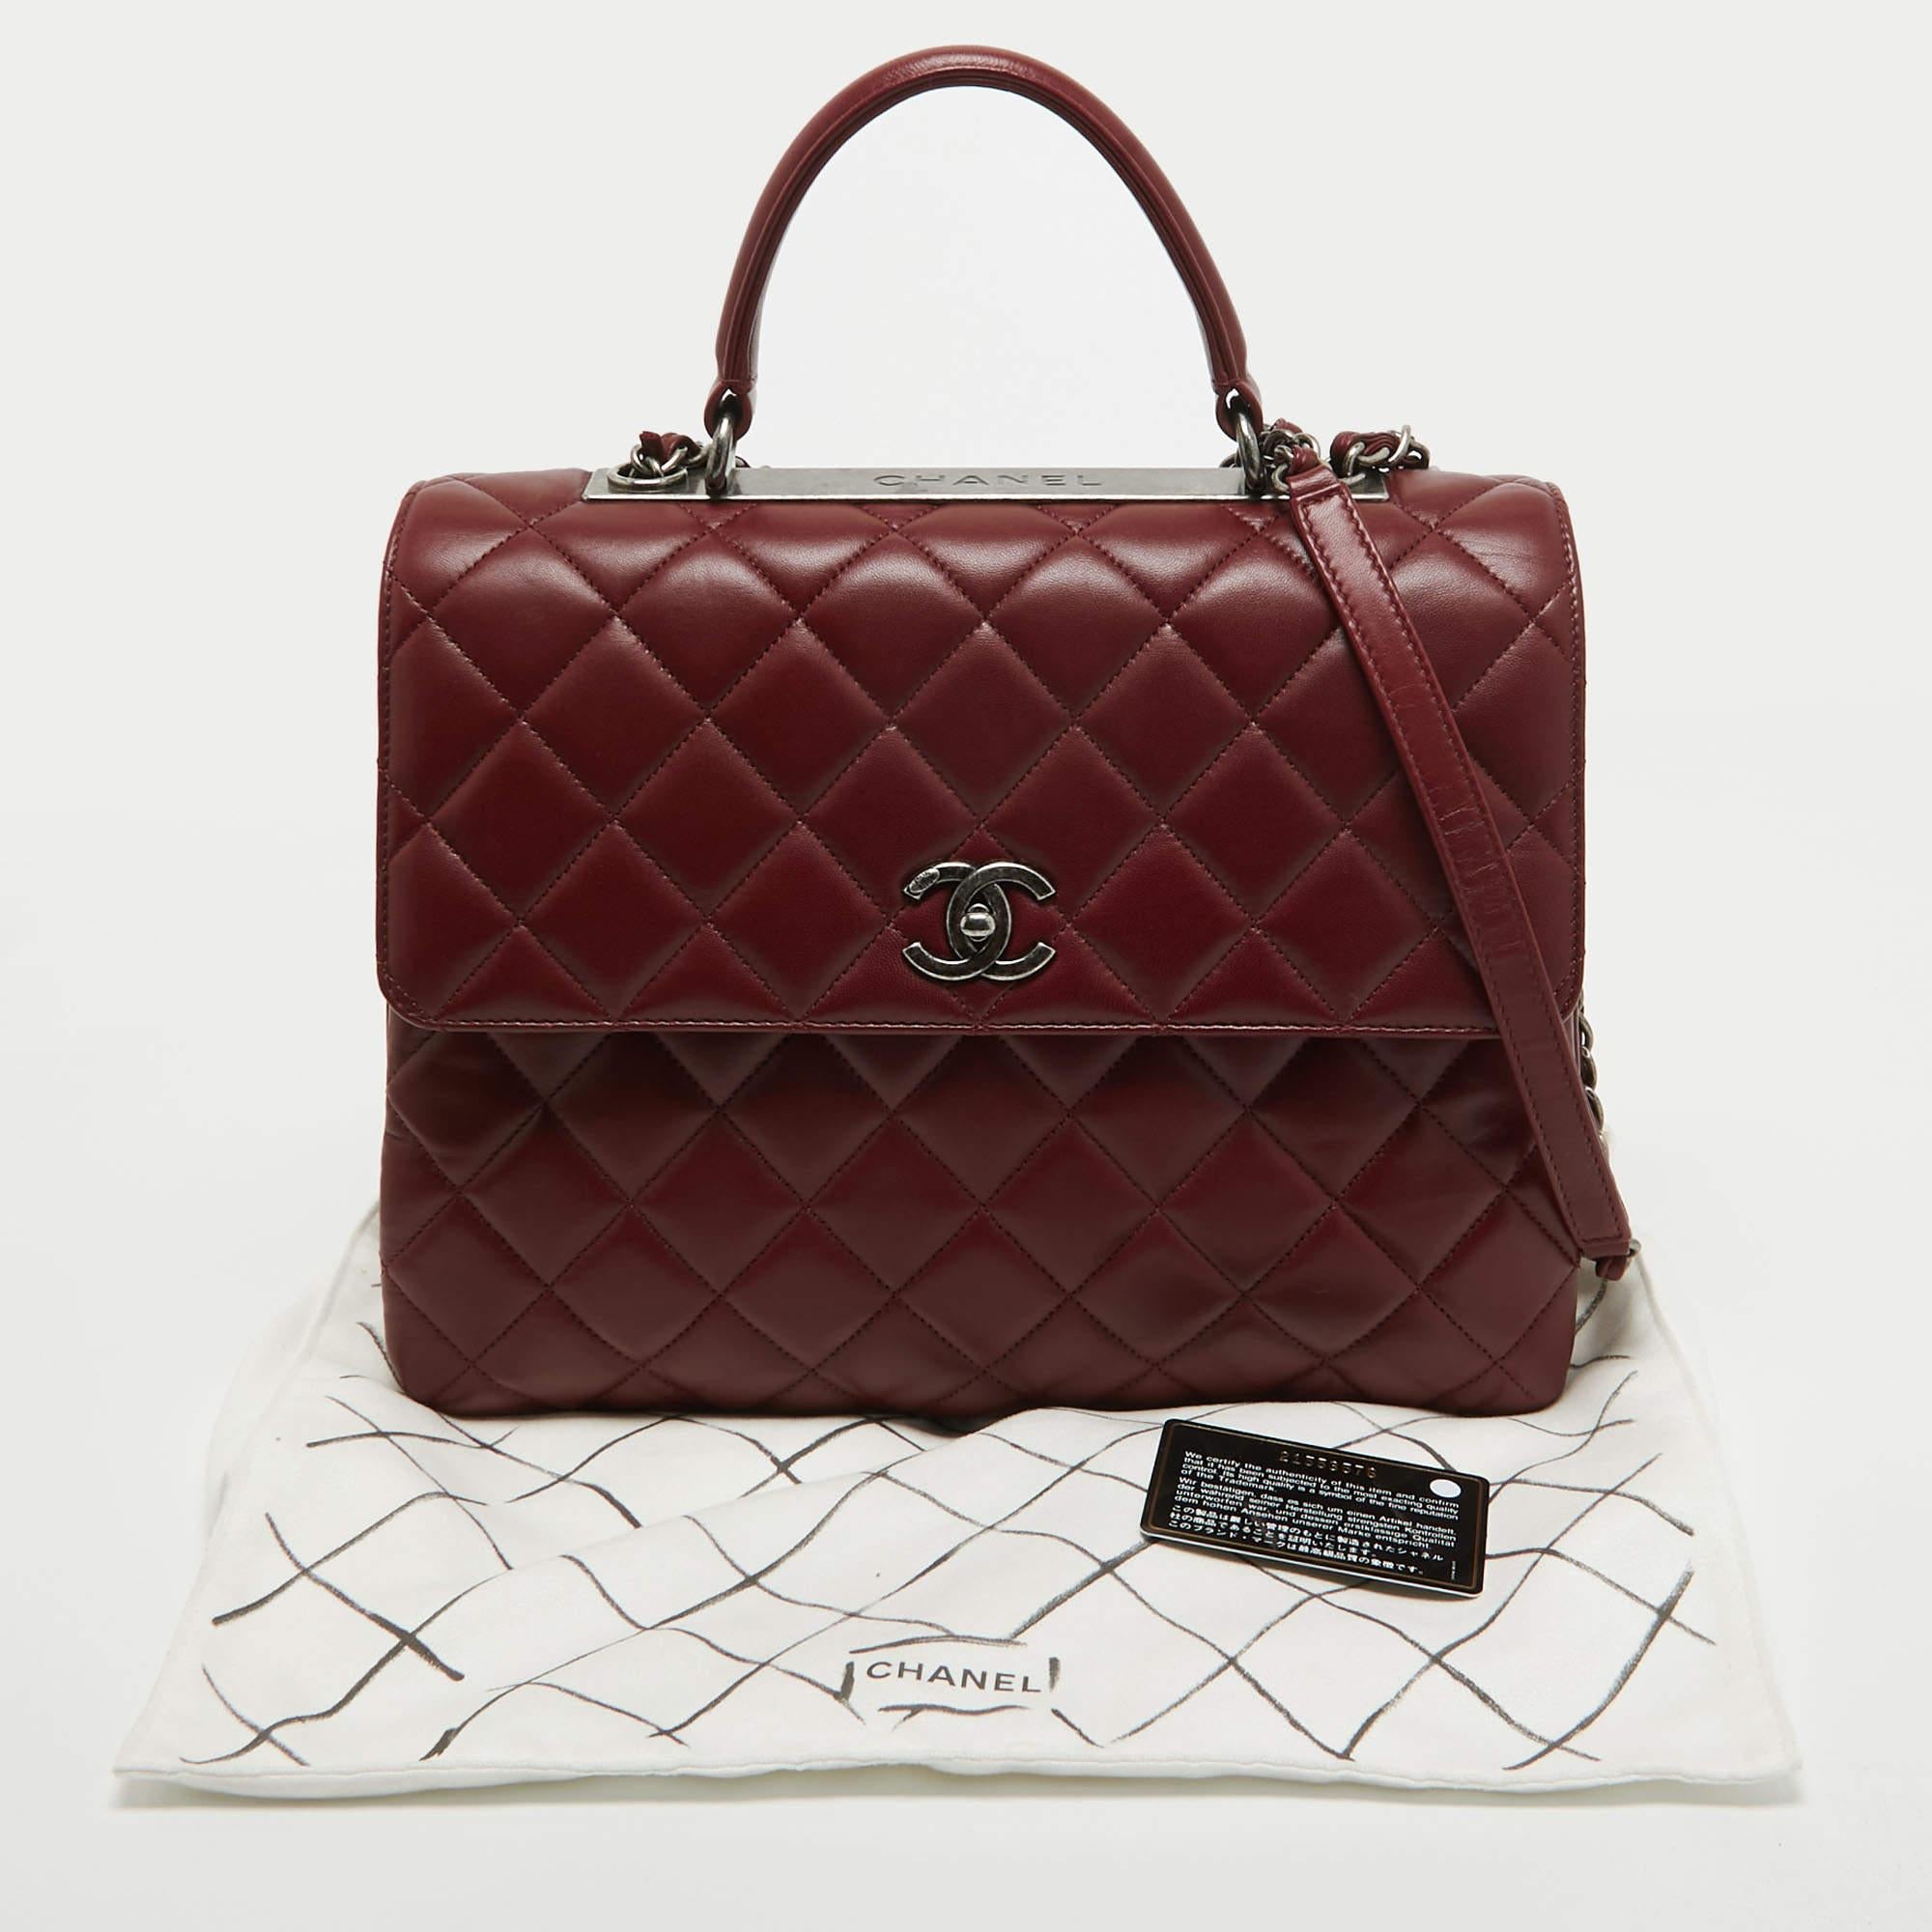 Chanel Dark Red Quilted Leather Large Trendy CC Top Handle Bag For Sale 11